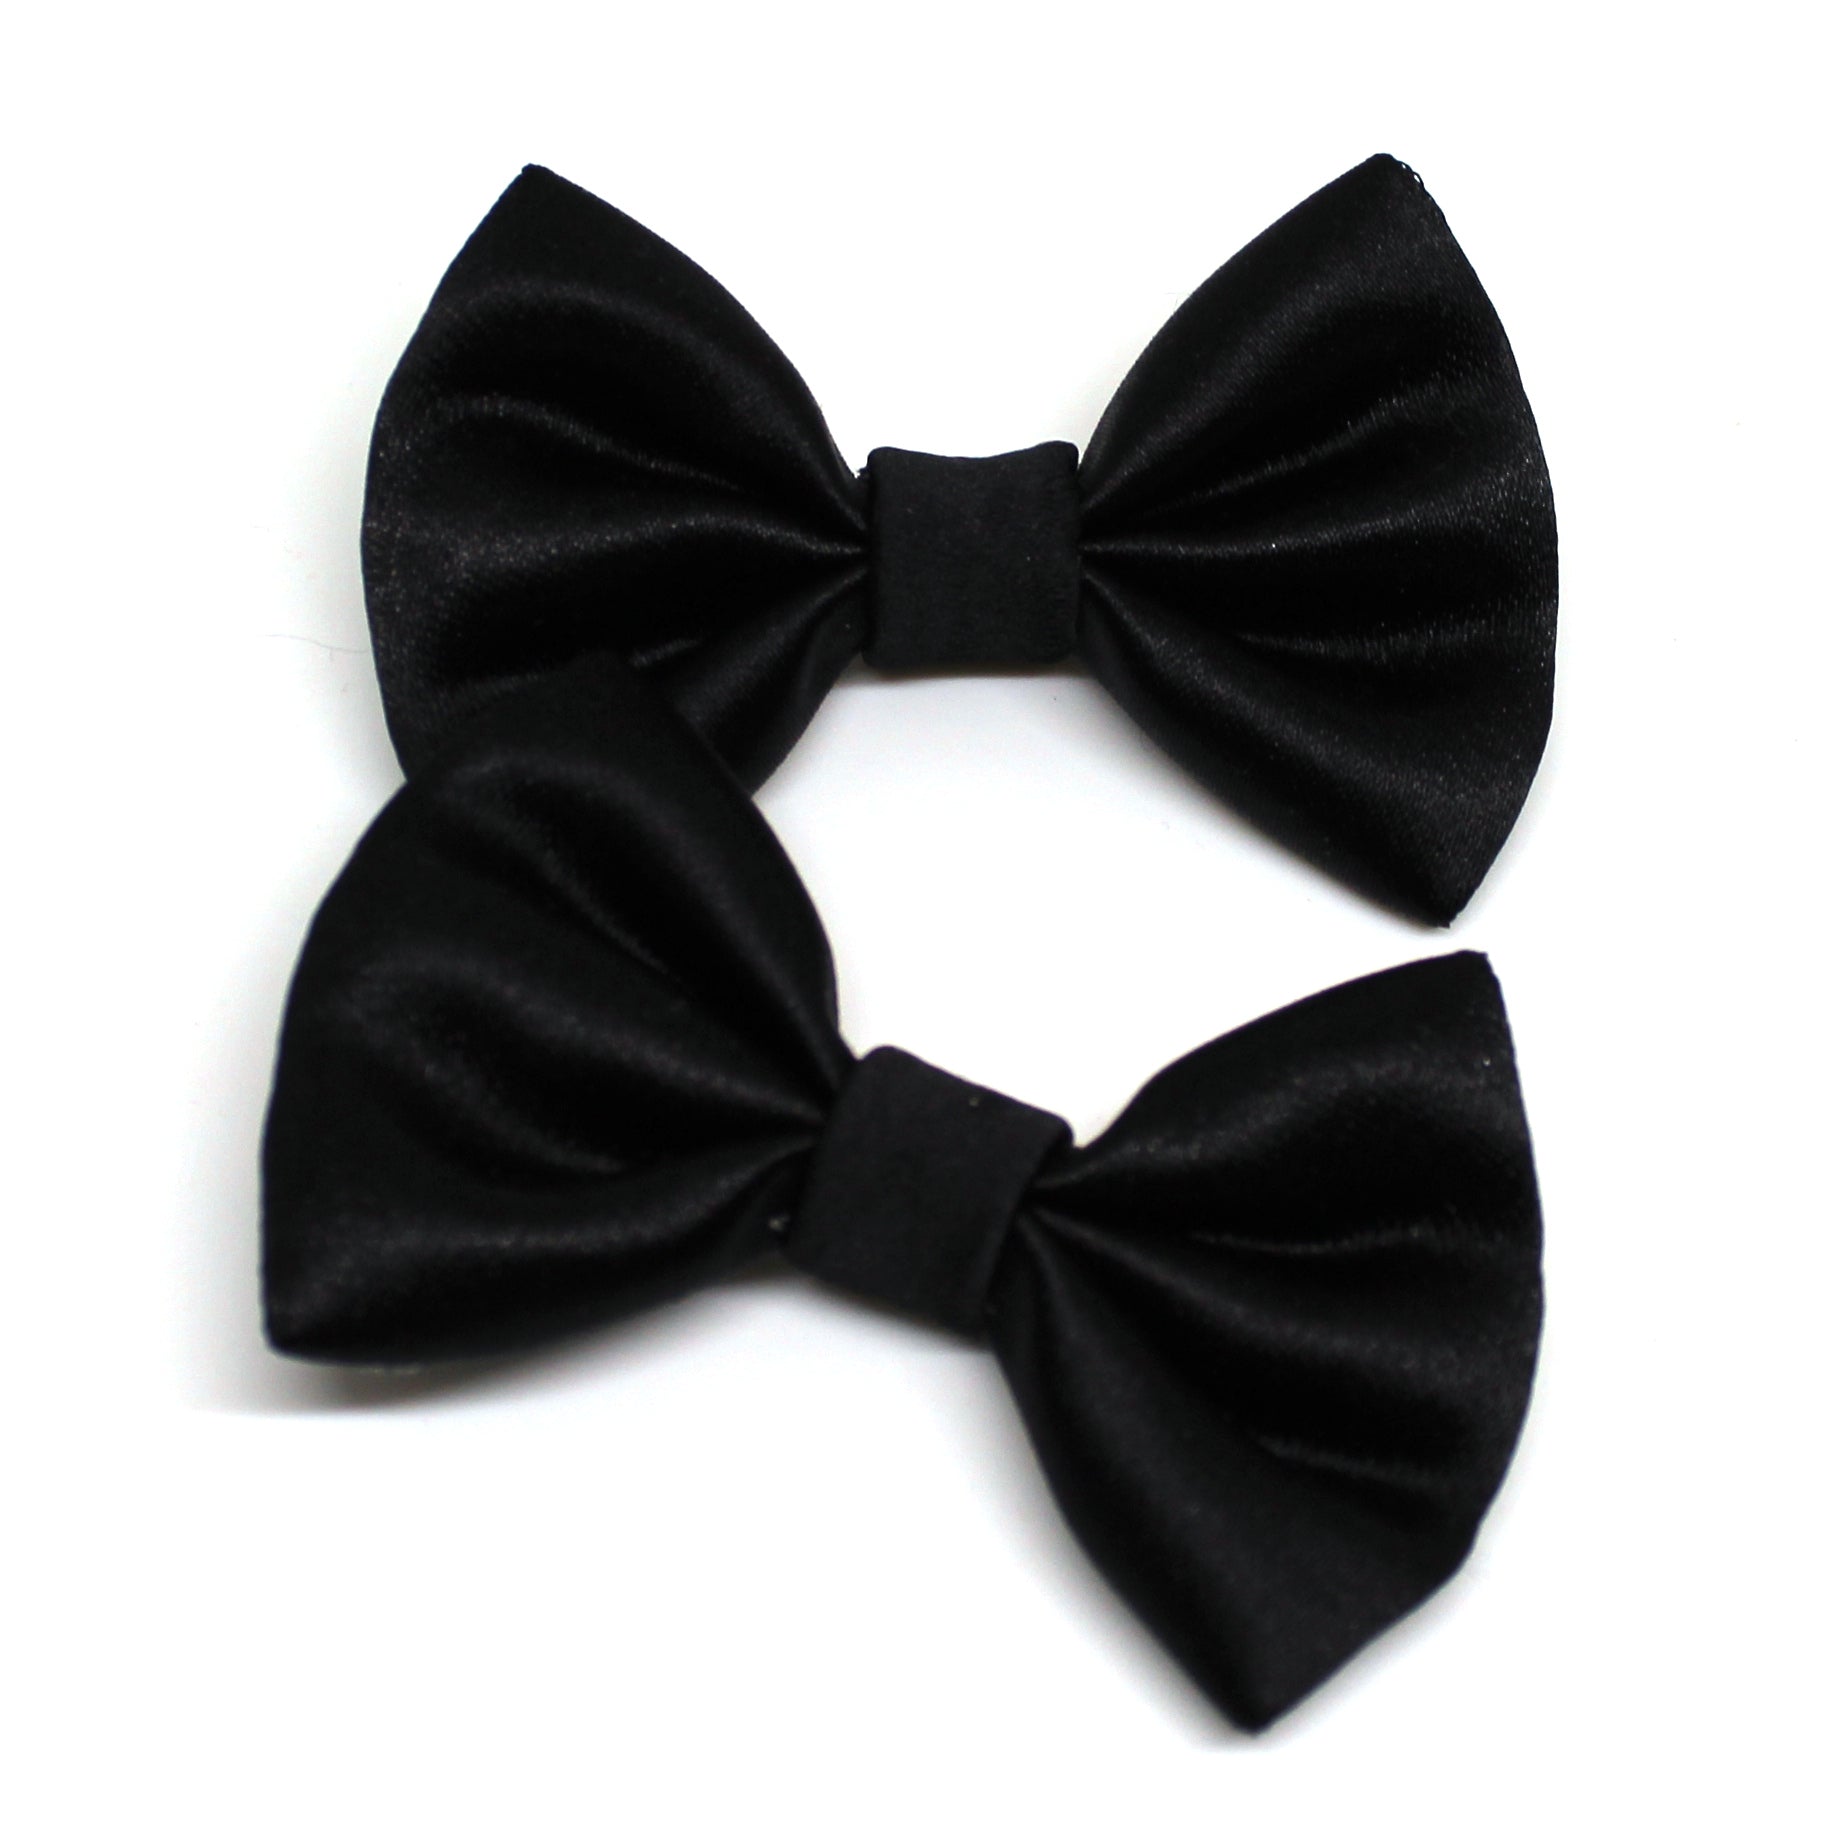 Classic Black Fabric Pigtail Clips